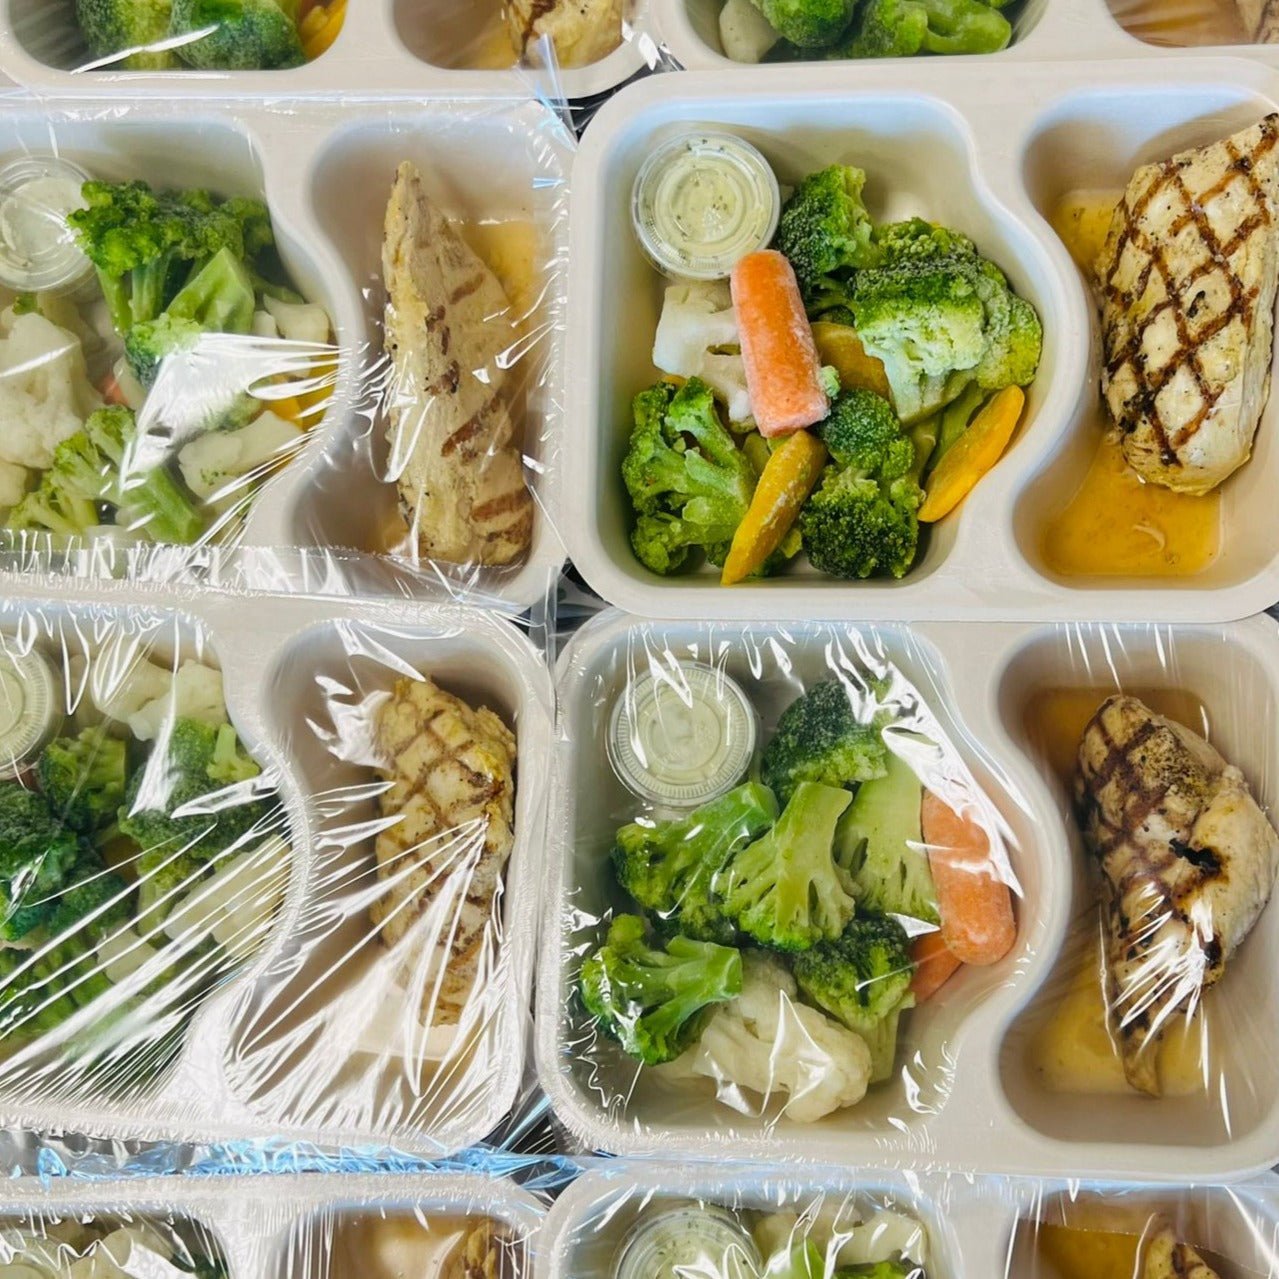 Healthy, convenient, meals for one for a week